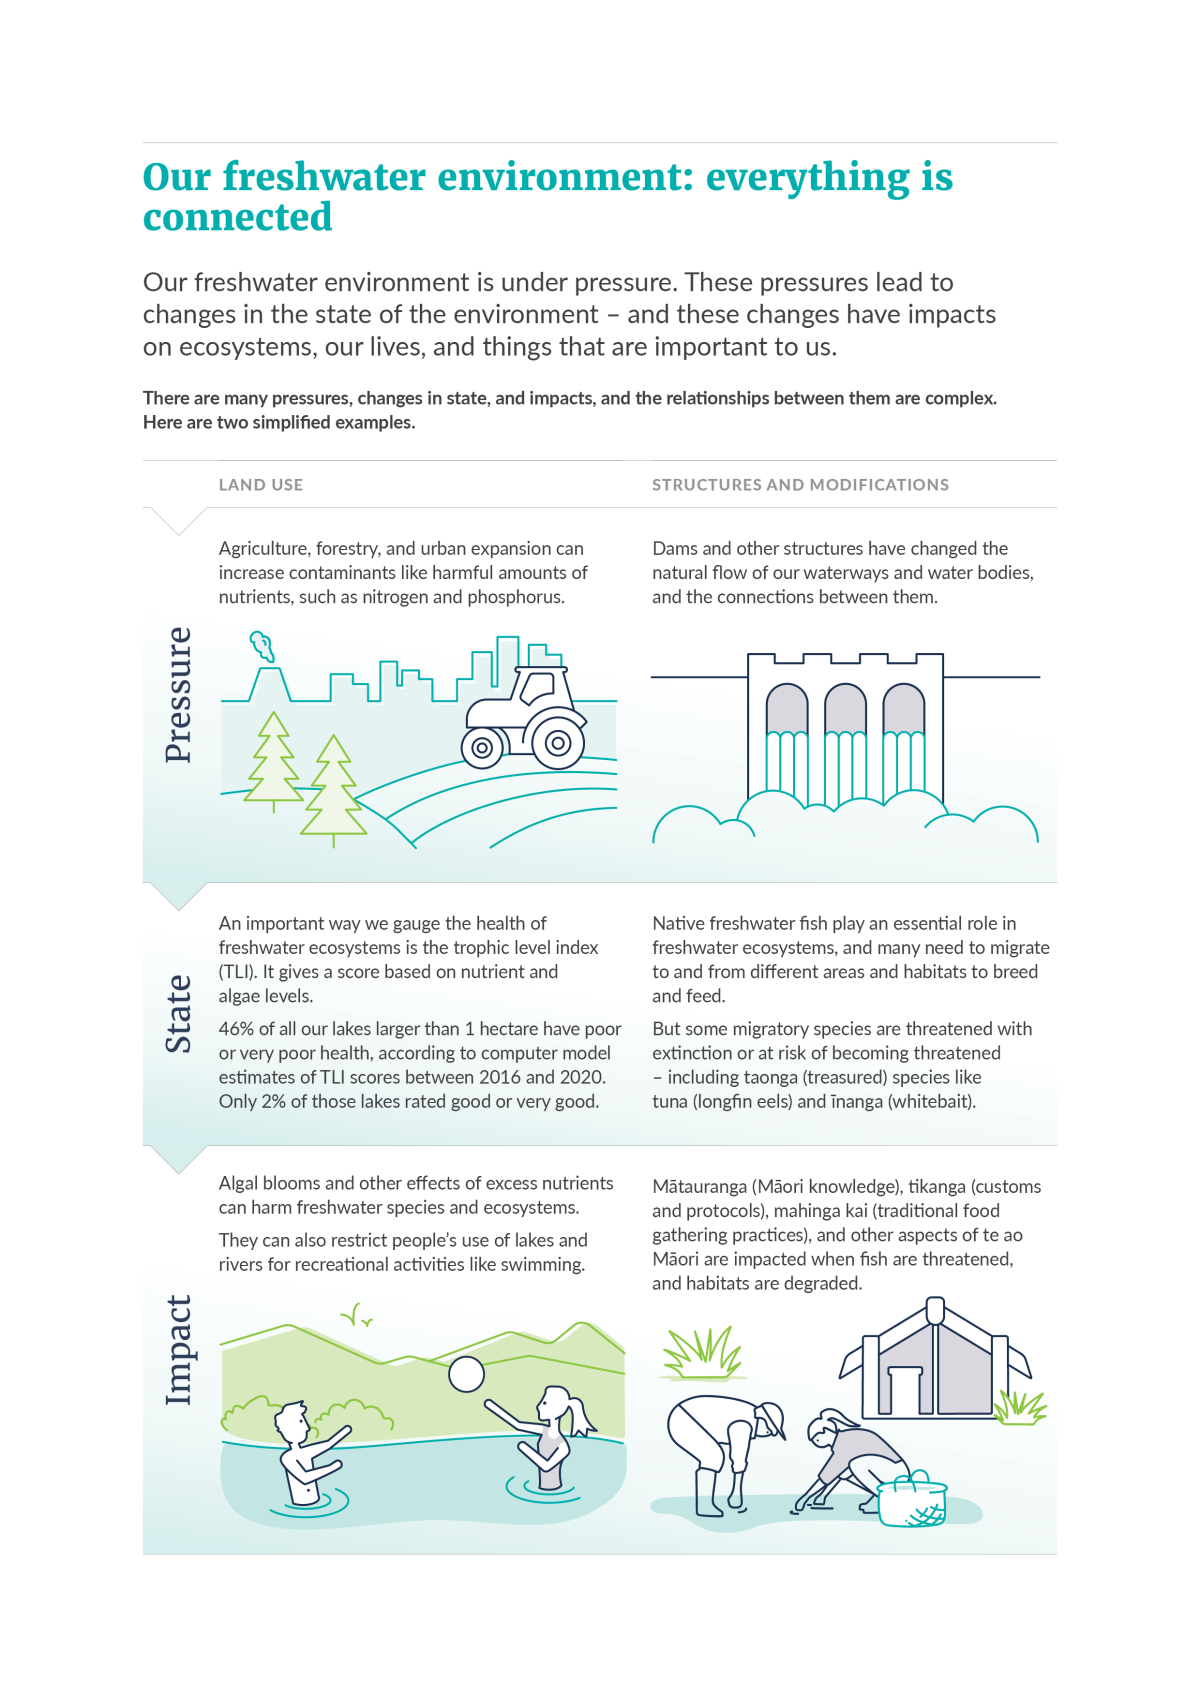 Our freshwater environment: everything is connected infographic. Read description for full text.